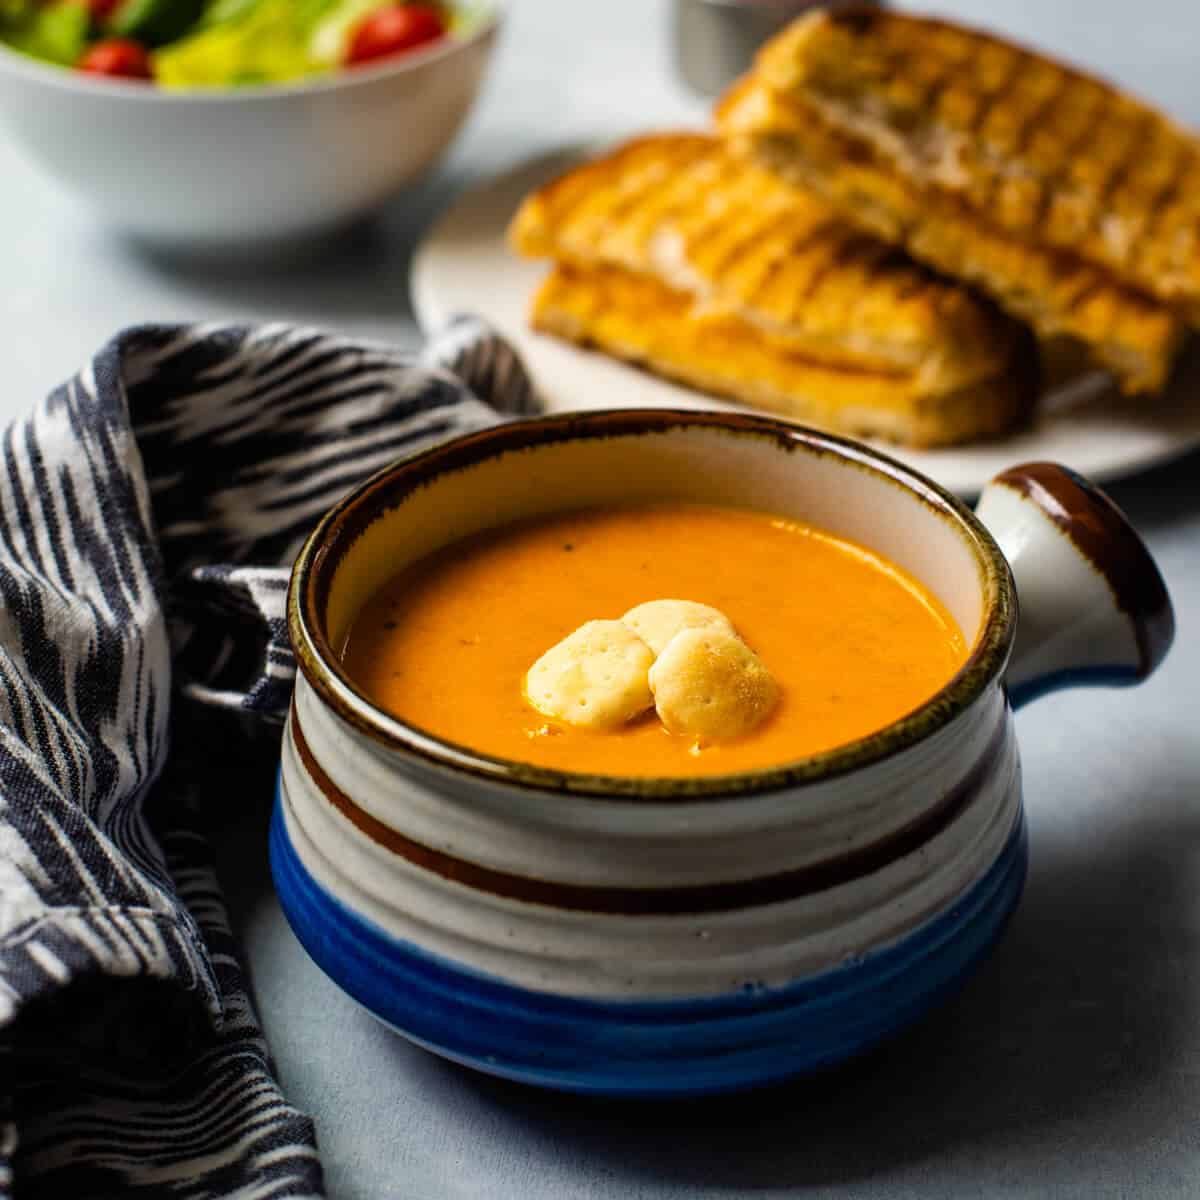 A small soup bowl with a handle on the right side filled with tomato basil soup and topped with oyster crackers with a grilled cheese sandwich in the back.